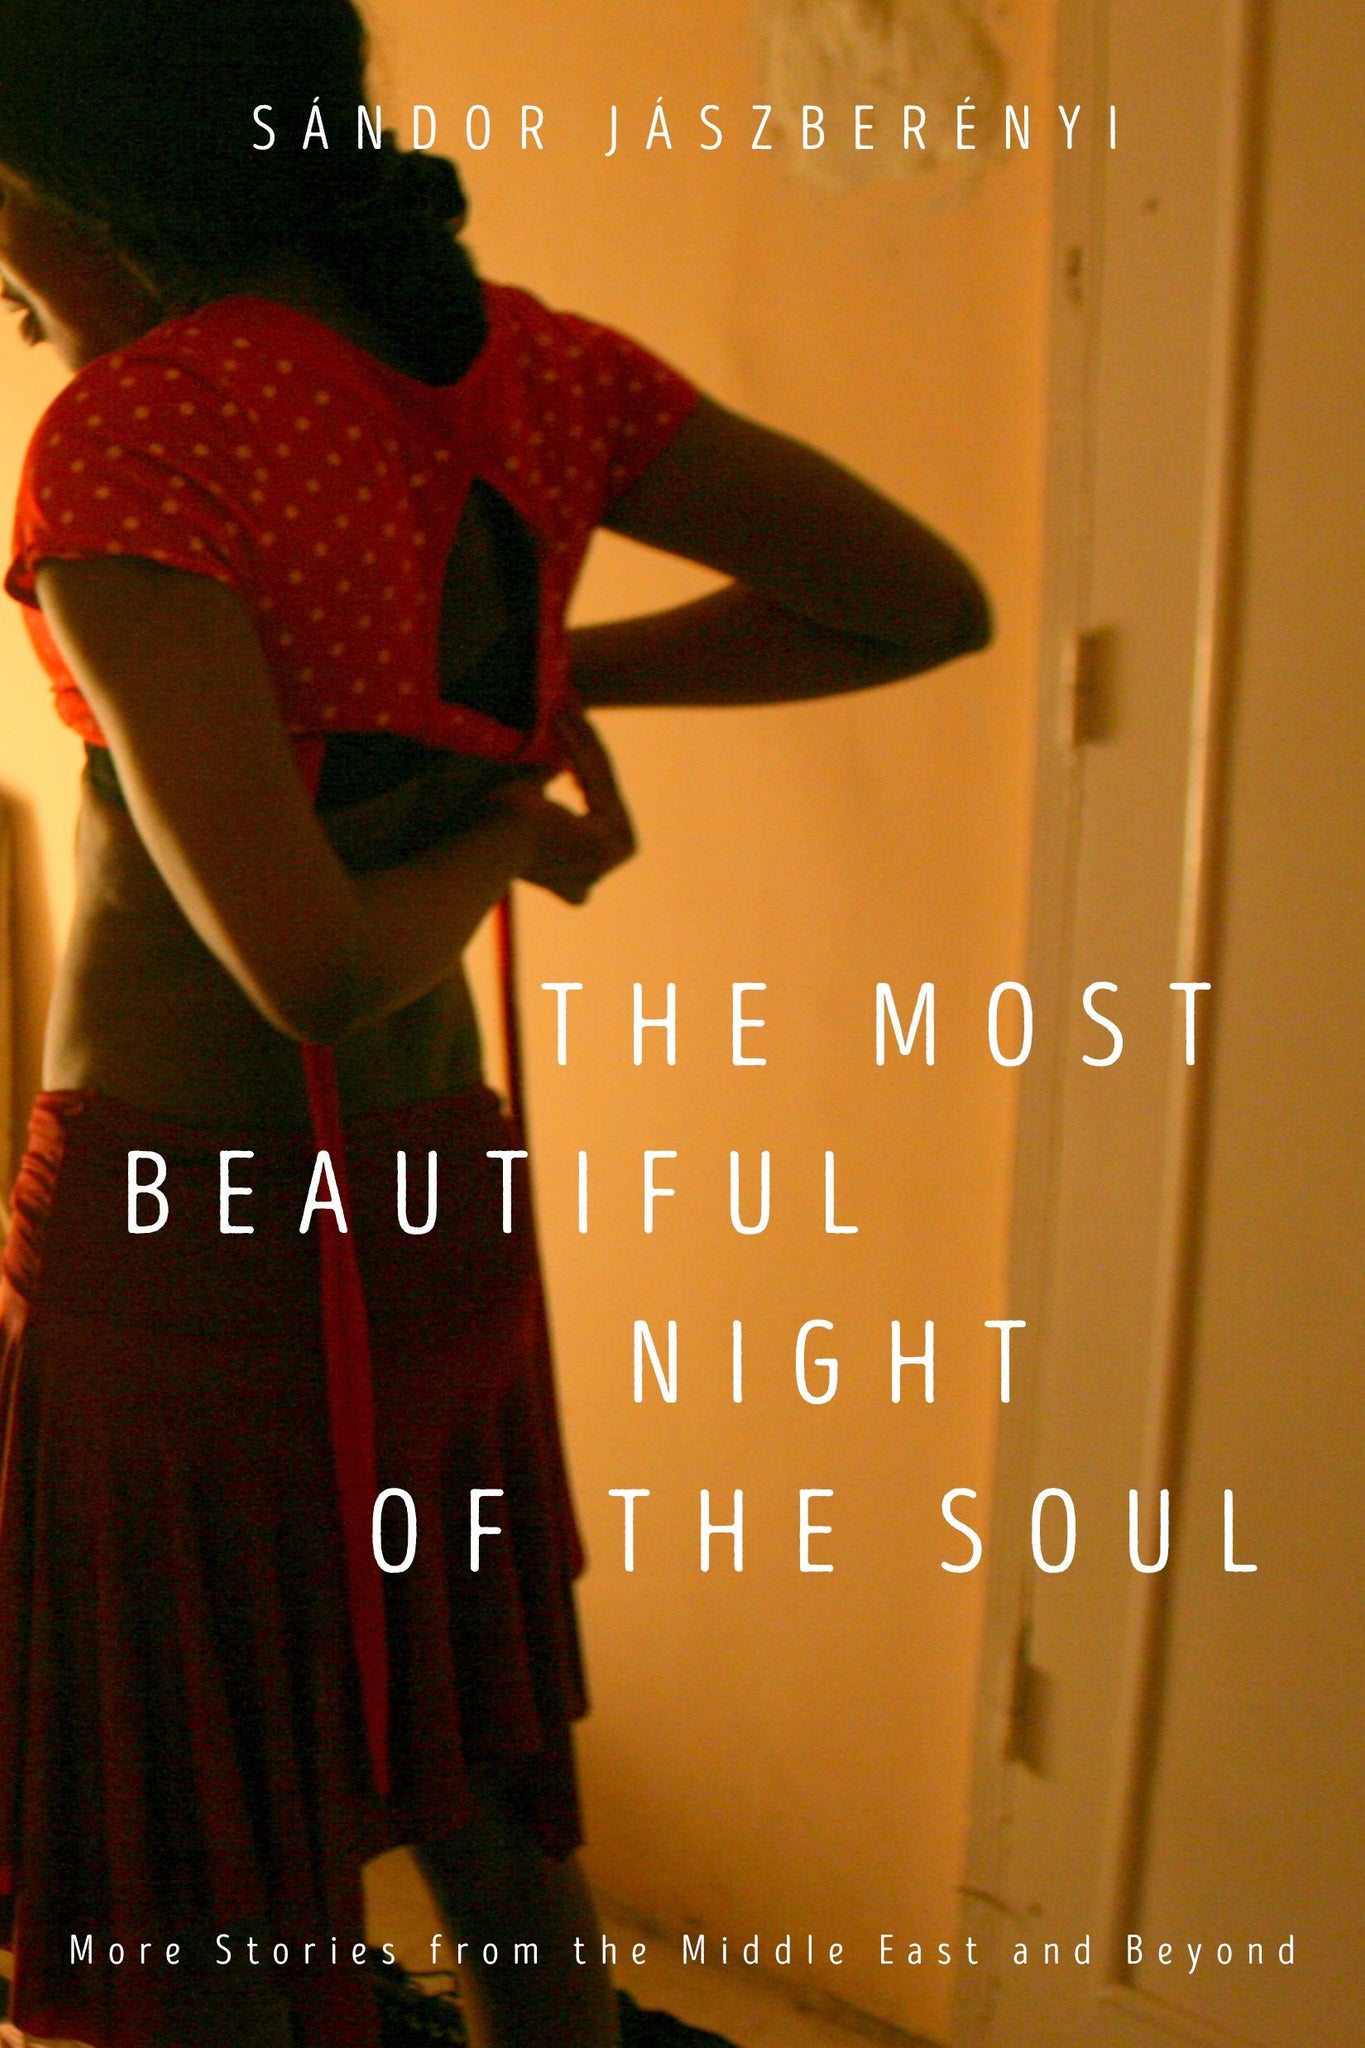 The Most Beautiful Night Of The Soul: Stories